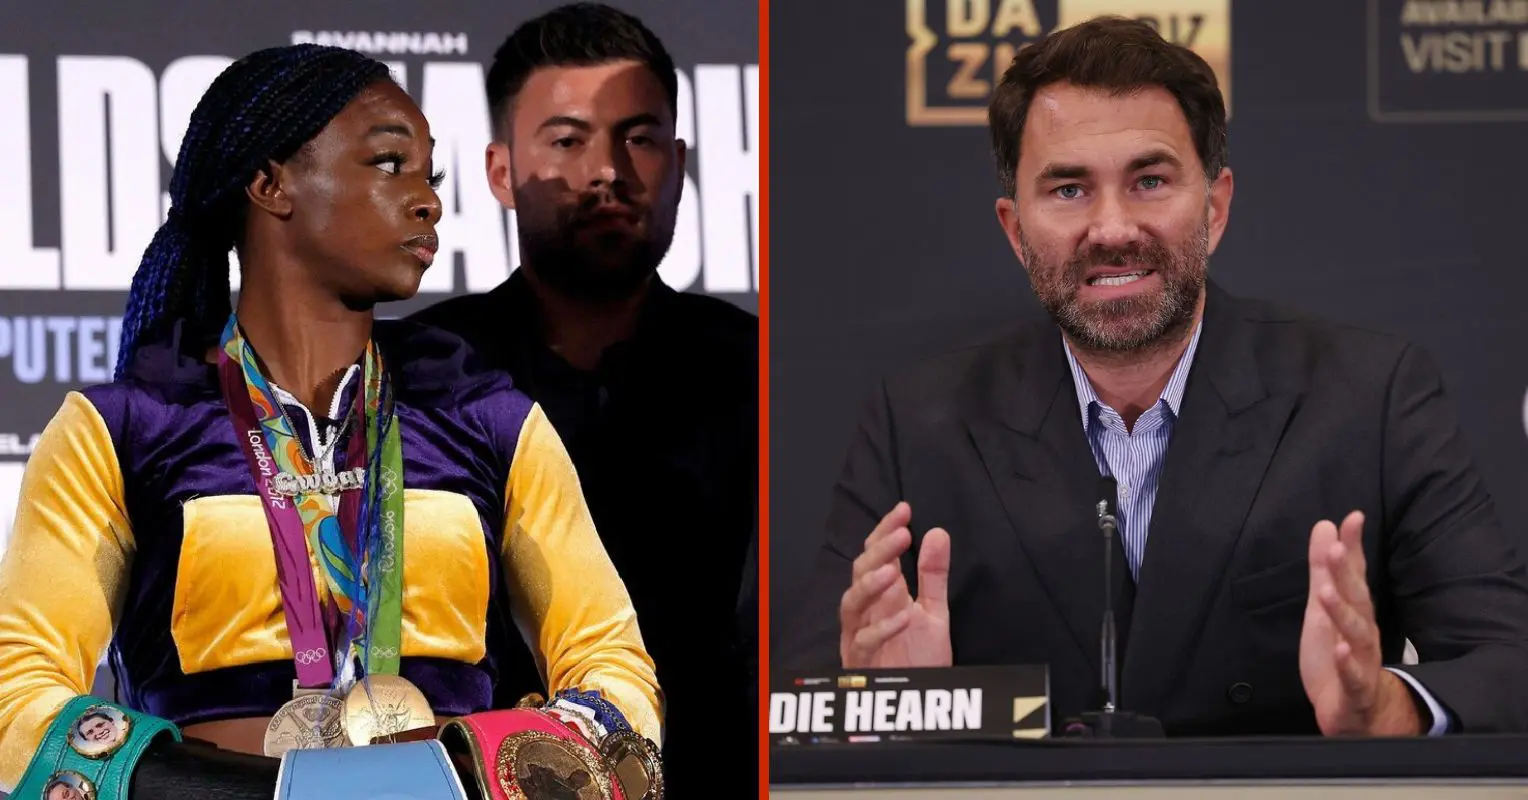 Hearn & Shields hit out against influencer boxing following embarrassing Hemsley fight celebration  